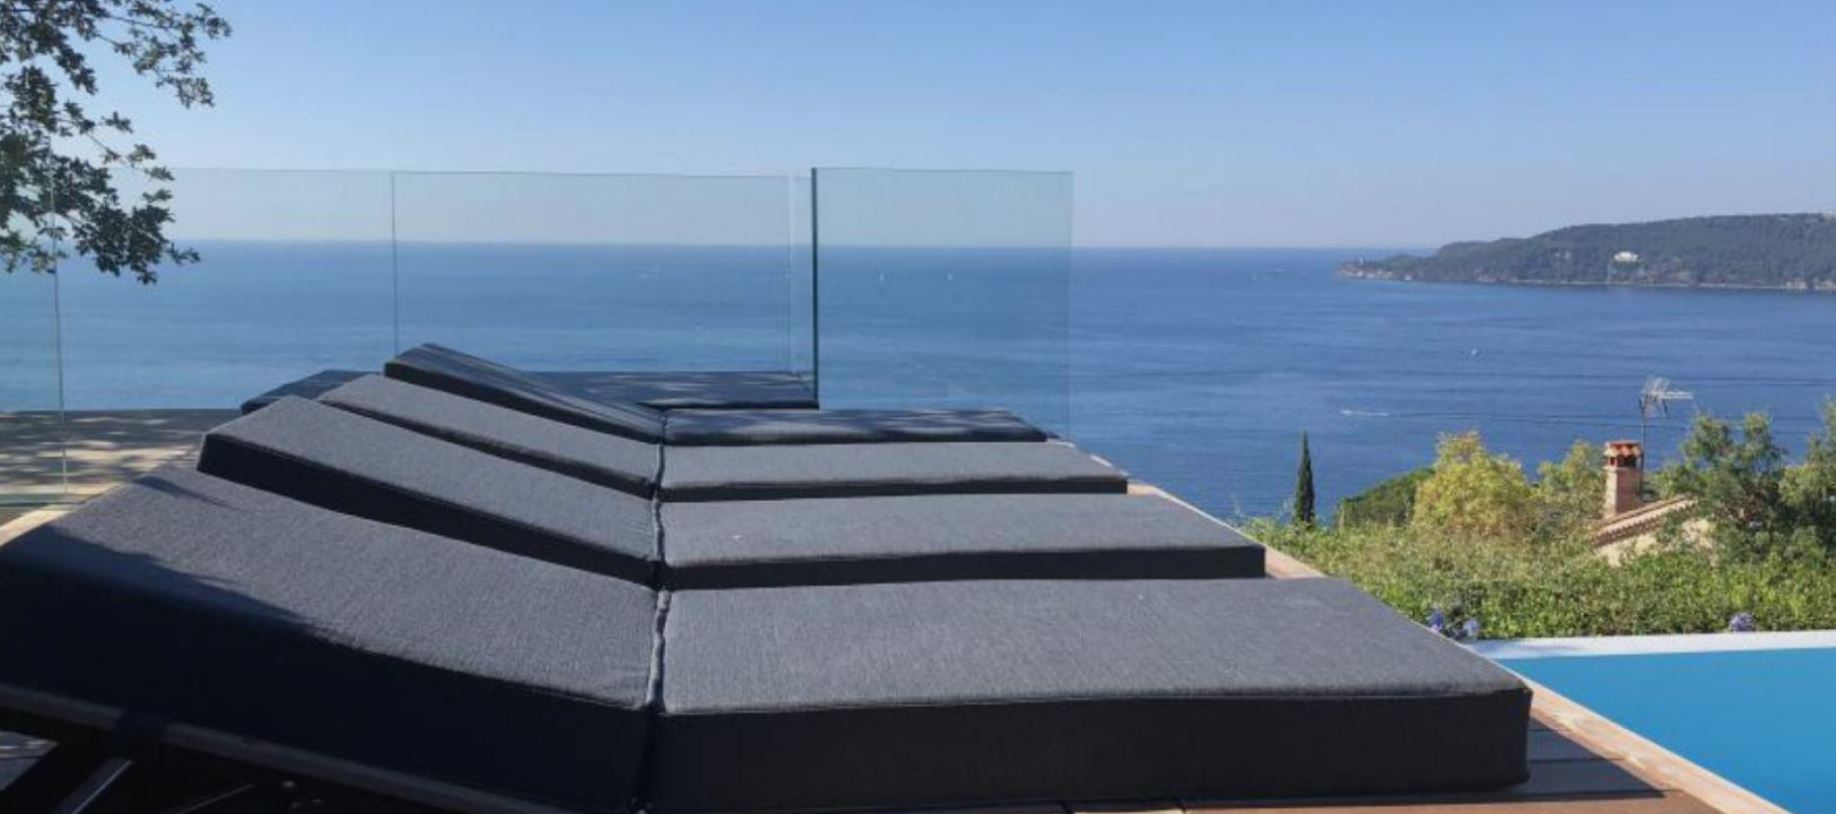 Mattress insensitive to eau Mousses Etoiles poolside - Sale and delivery in France and internationally 